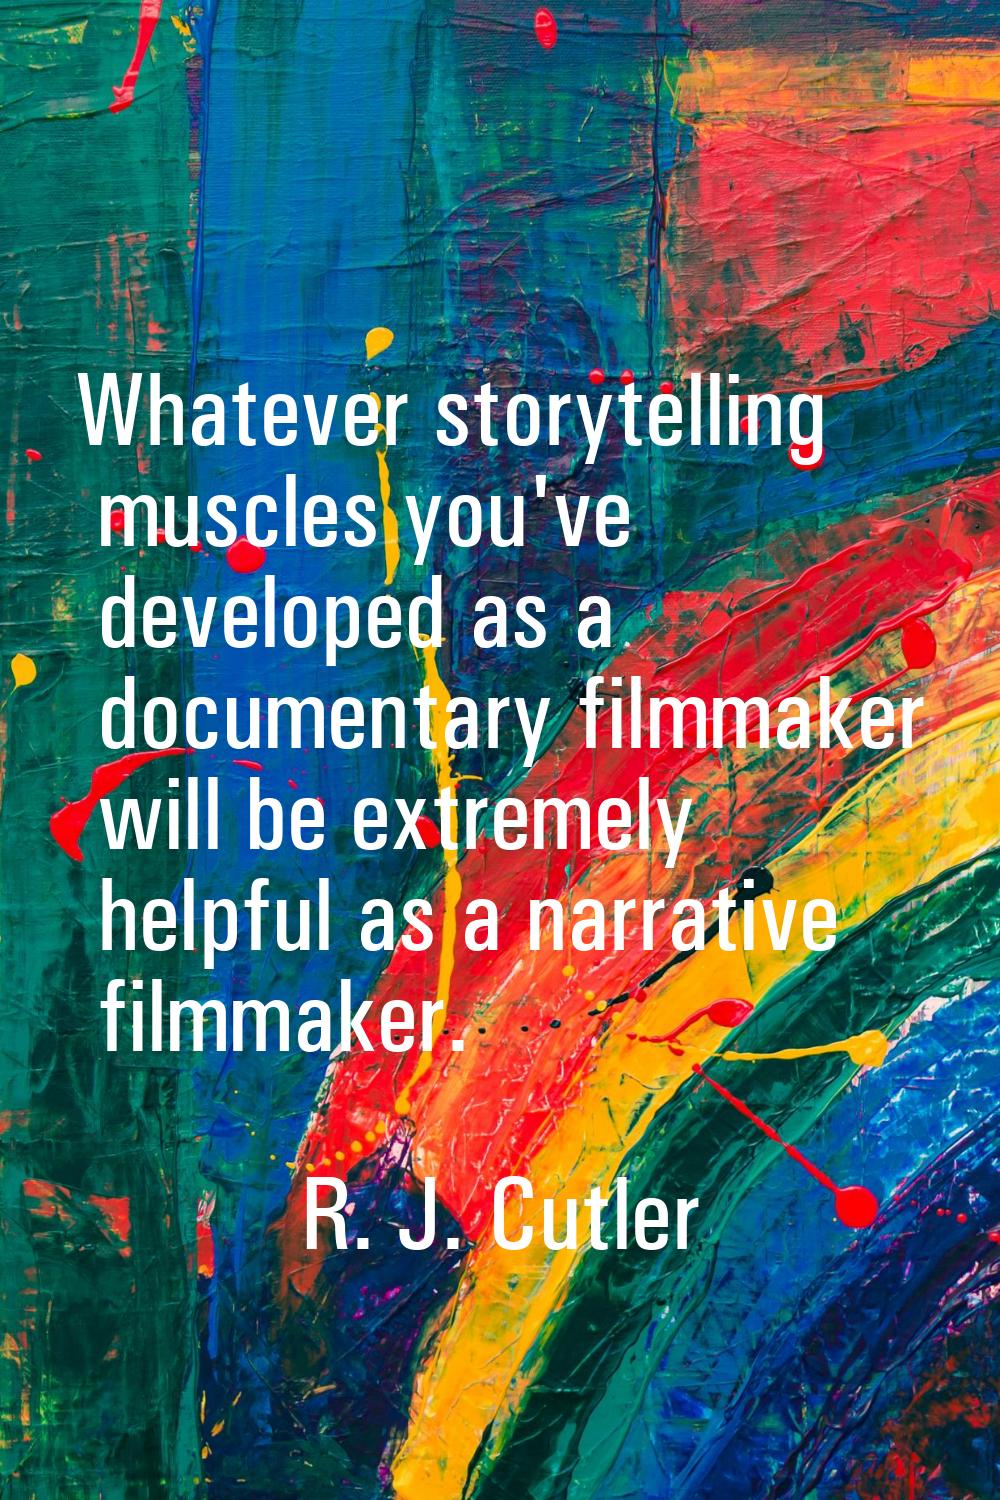 Whatever storytelling muscles you've developed as a documentary filmmaker will be extremely helpful